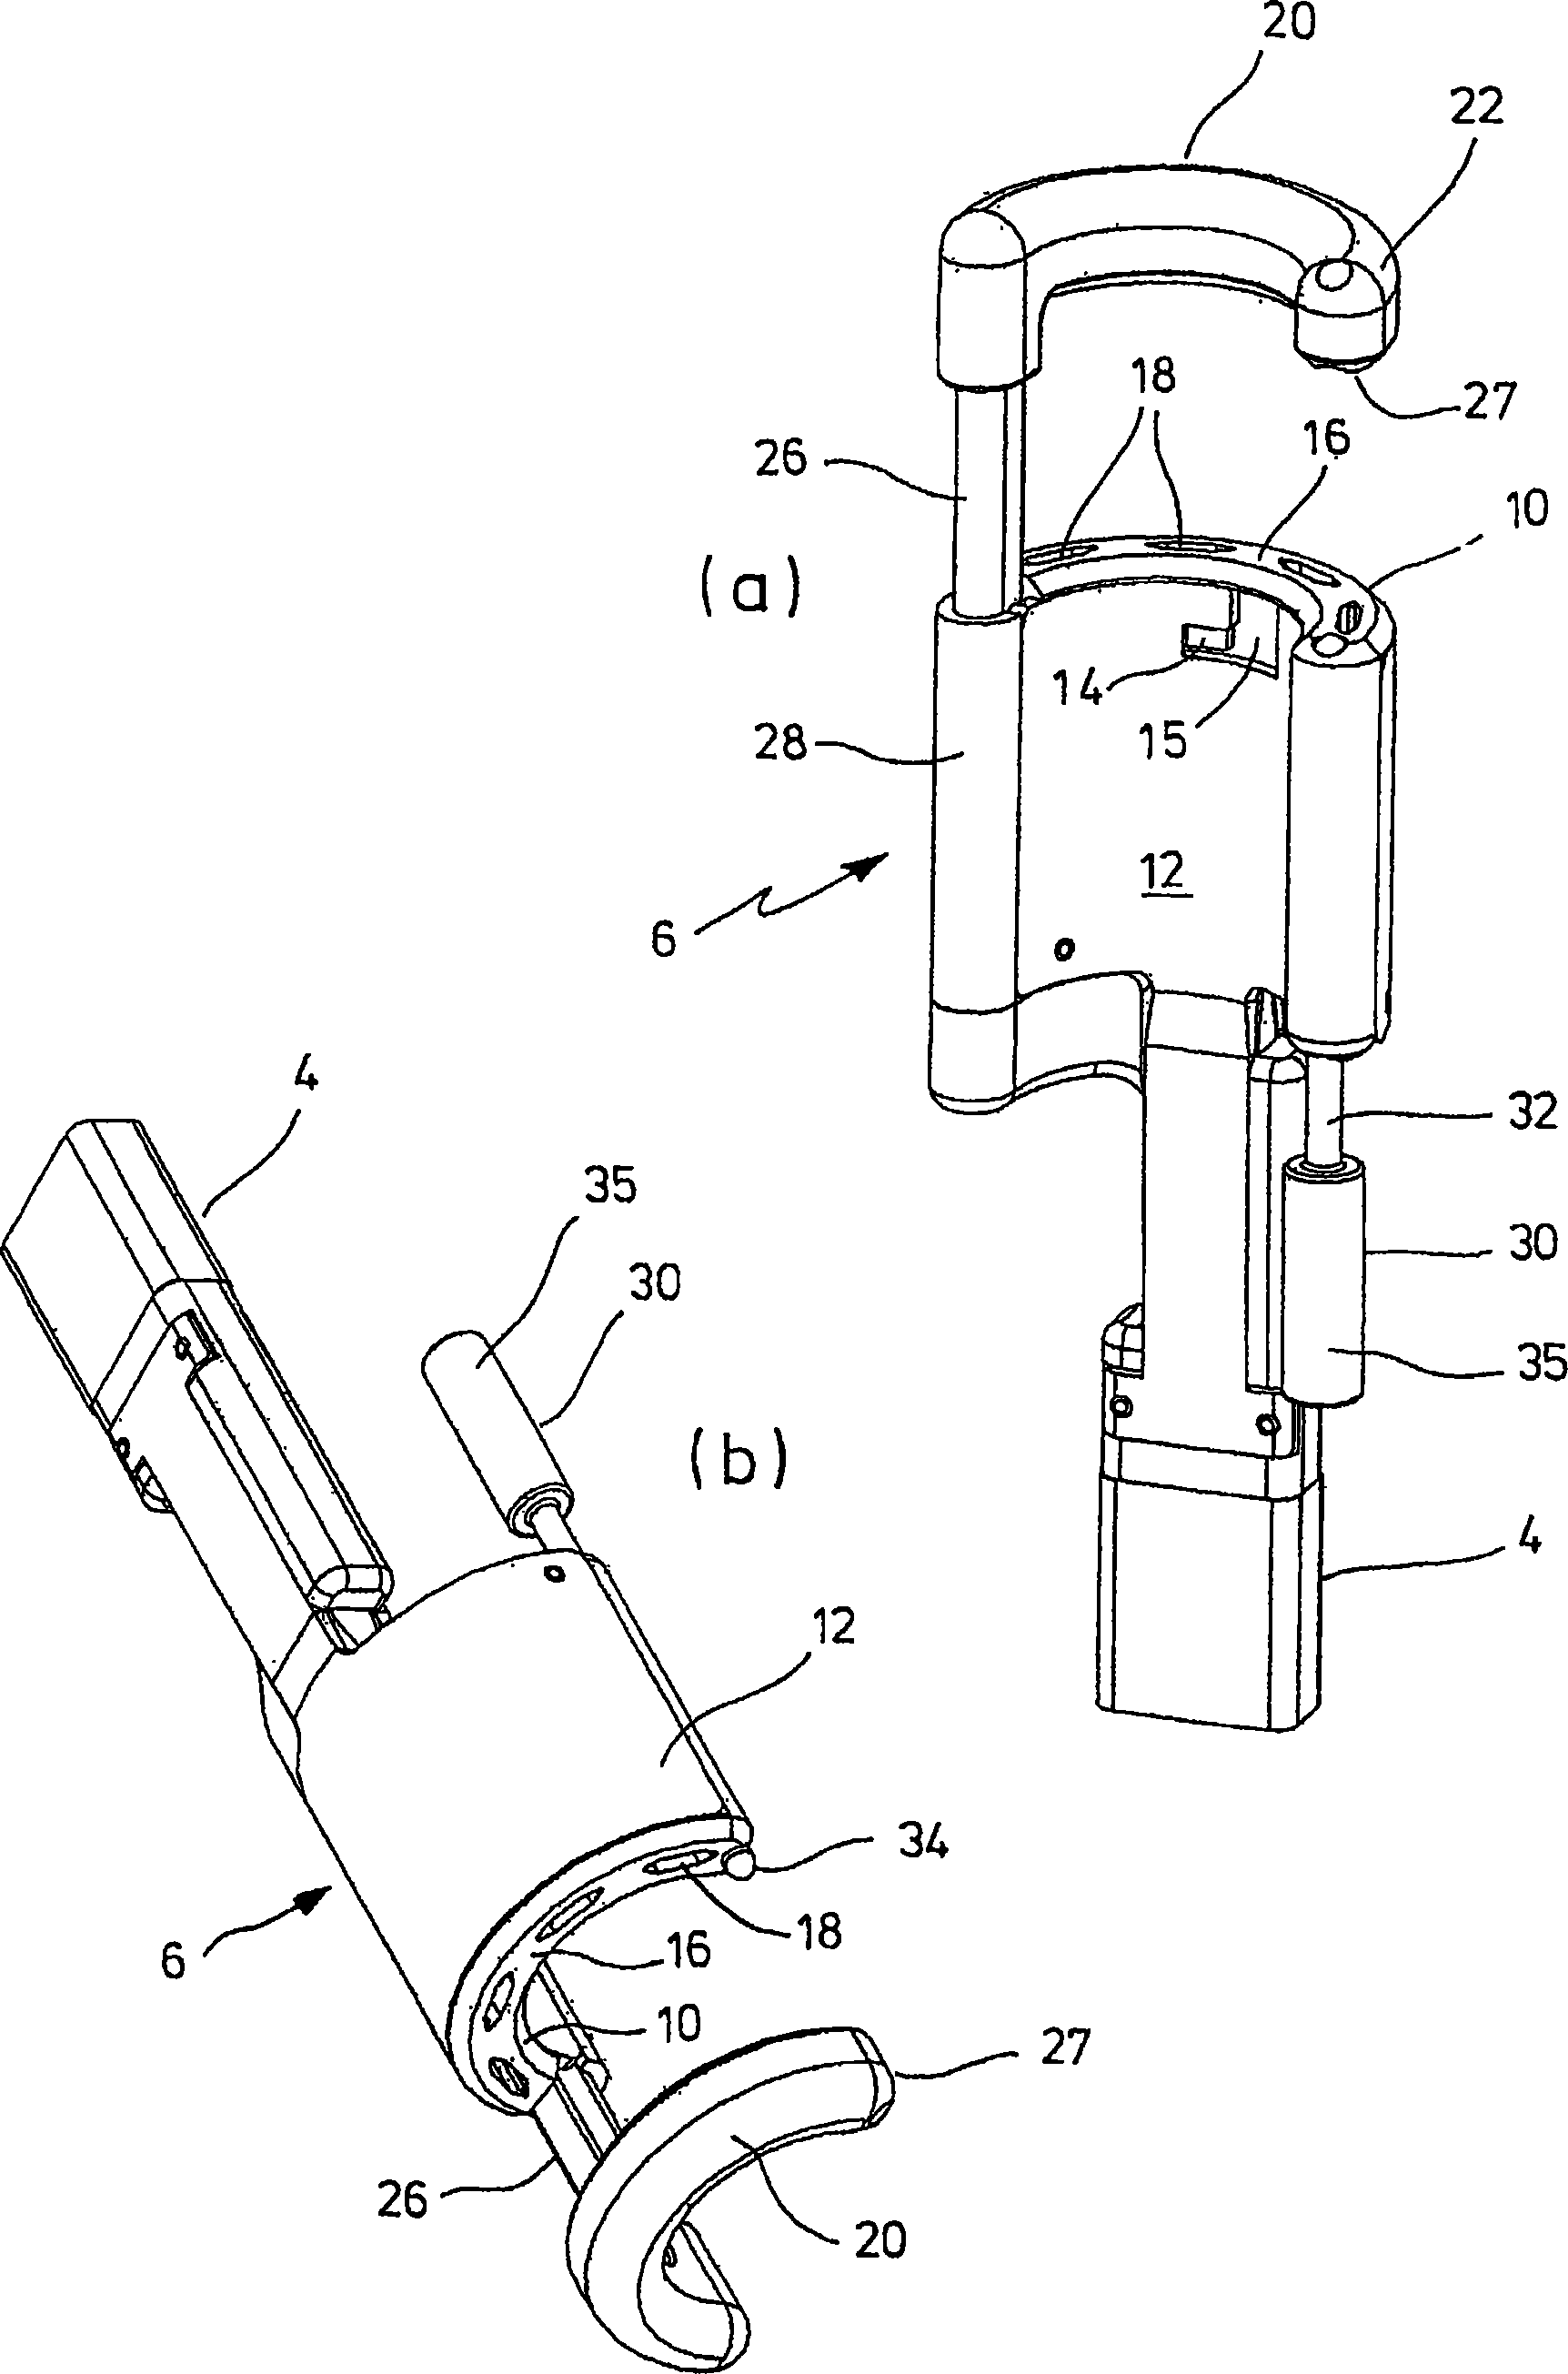 Surgical system with stapling instrument and retractor